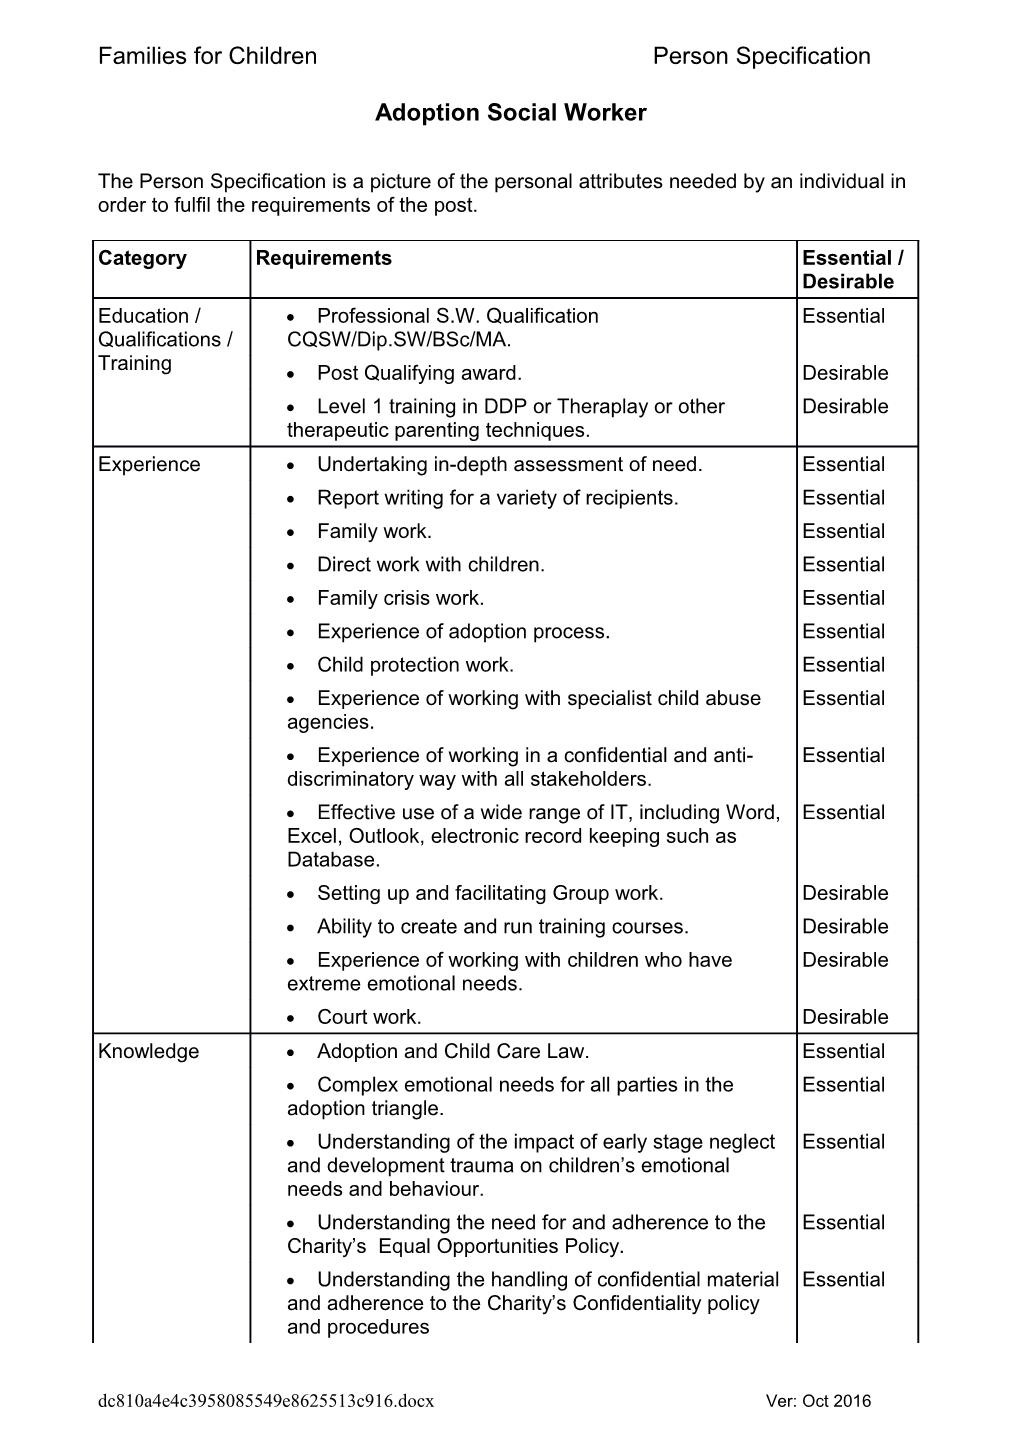 Families for Children Person Specification